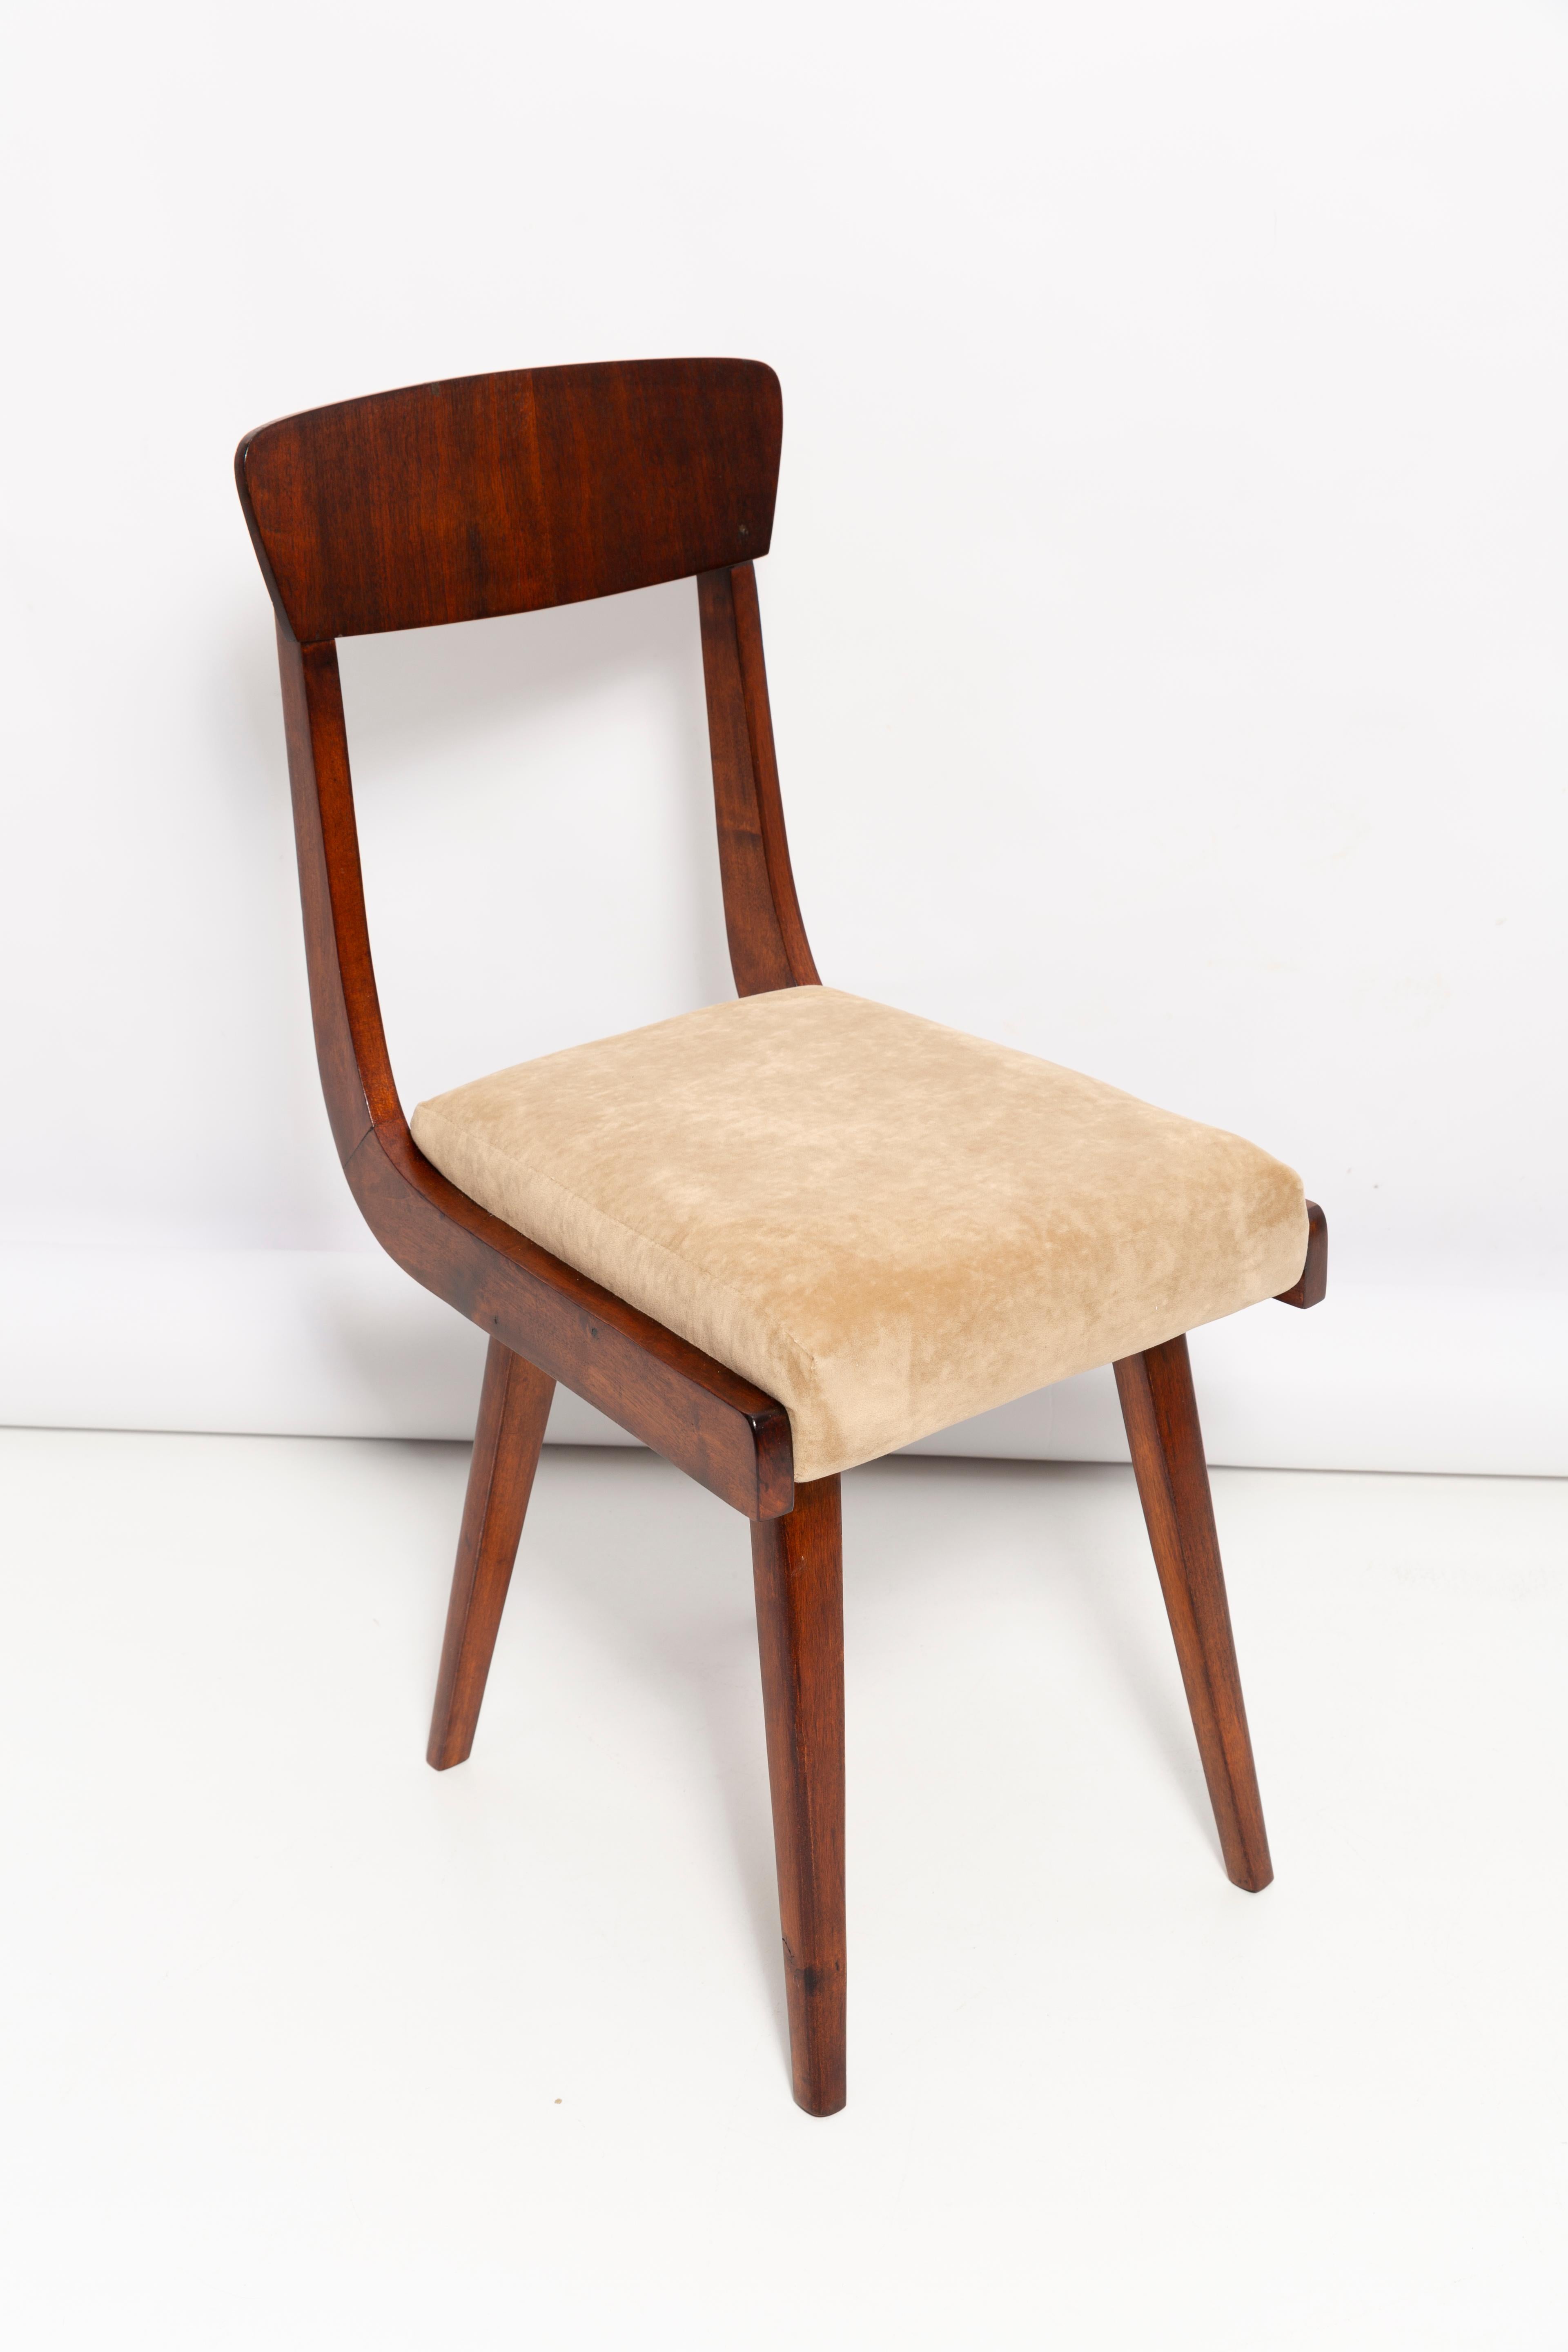 Hand-Crafted Mid Century Gazelle Beige Wood Chair, Europe, 1960s For Sale